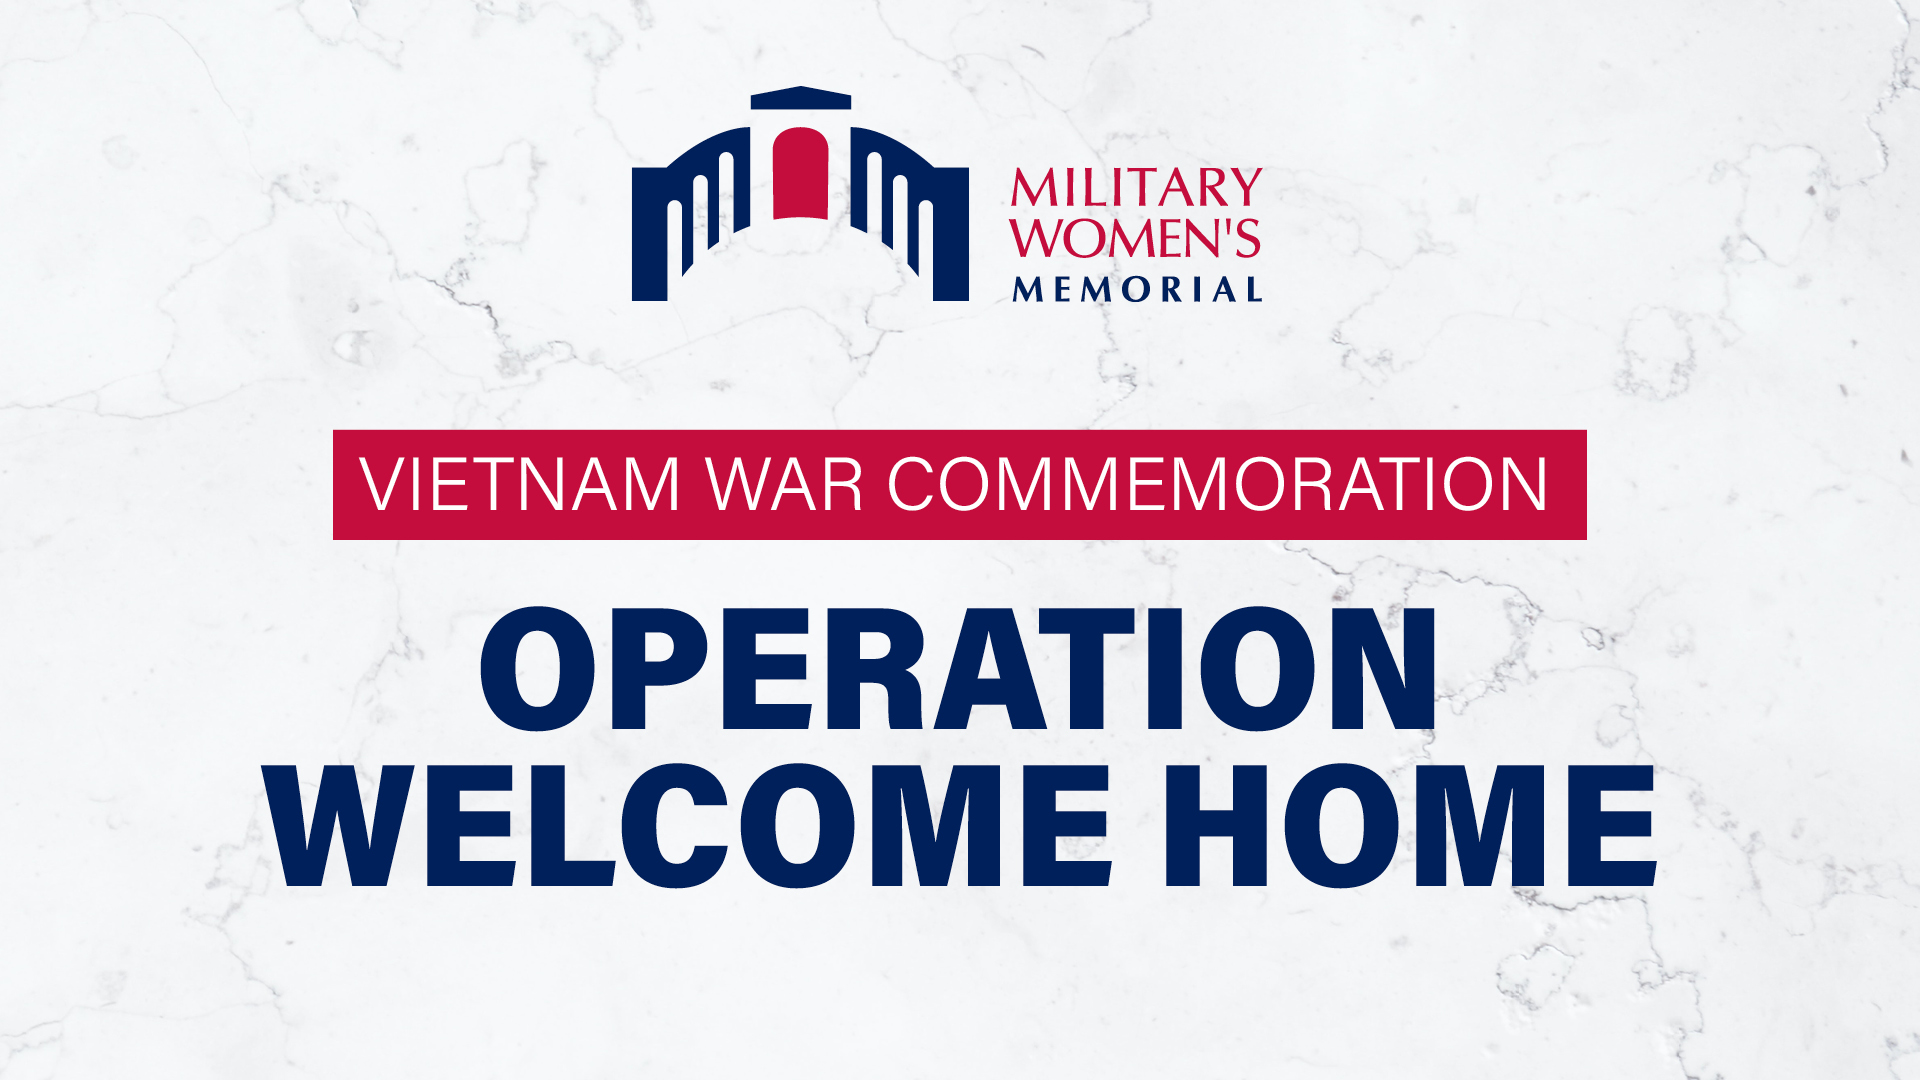 A stone background with the Military Women's Memorial logo at the top. Below is a red banner with white text, Vietnam War Commemoration. Underneath are the words Operation Welcome Home in blue.